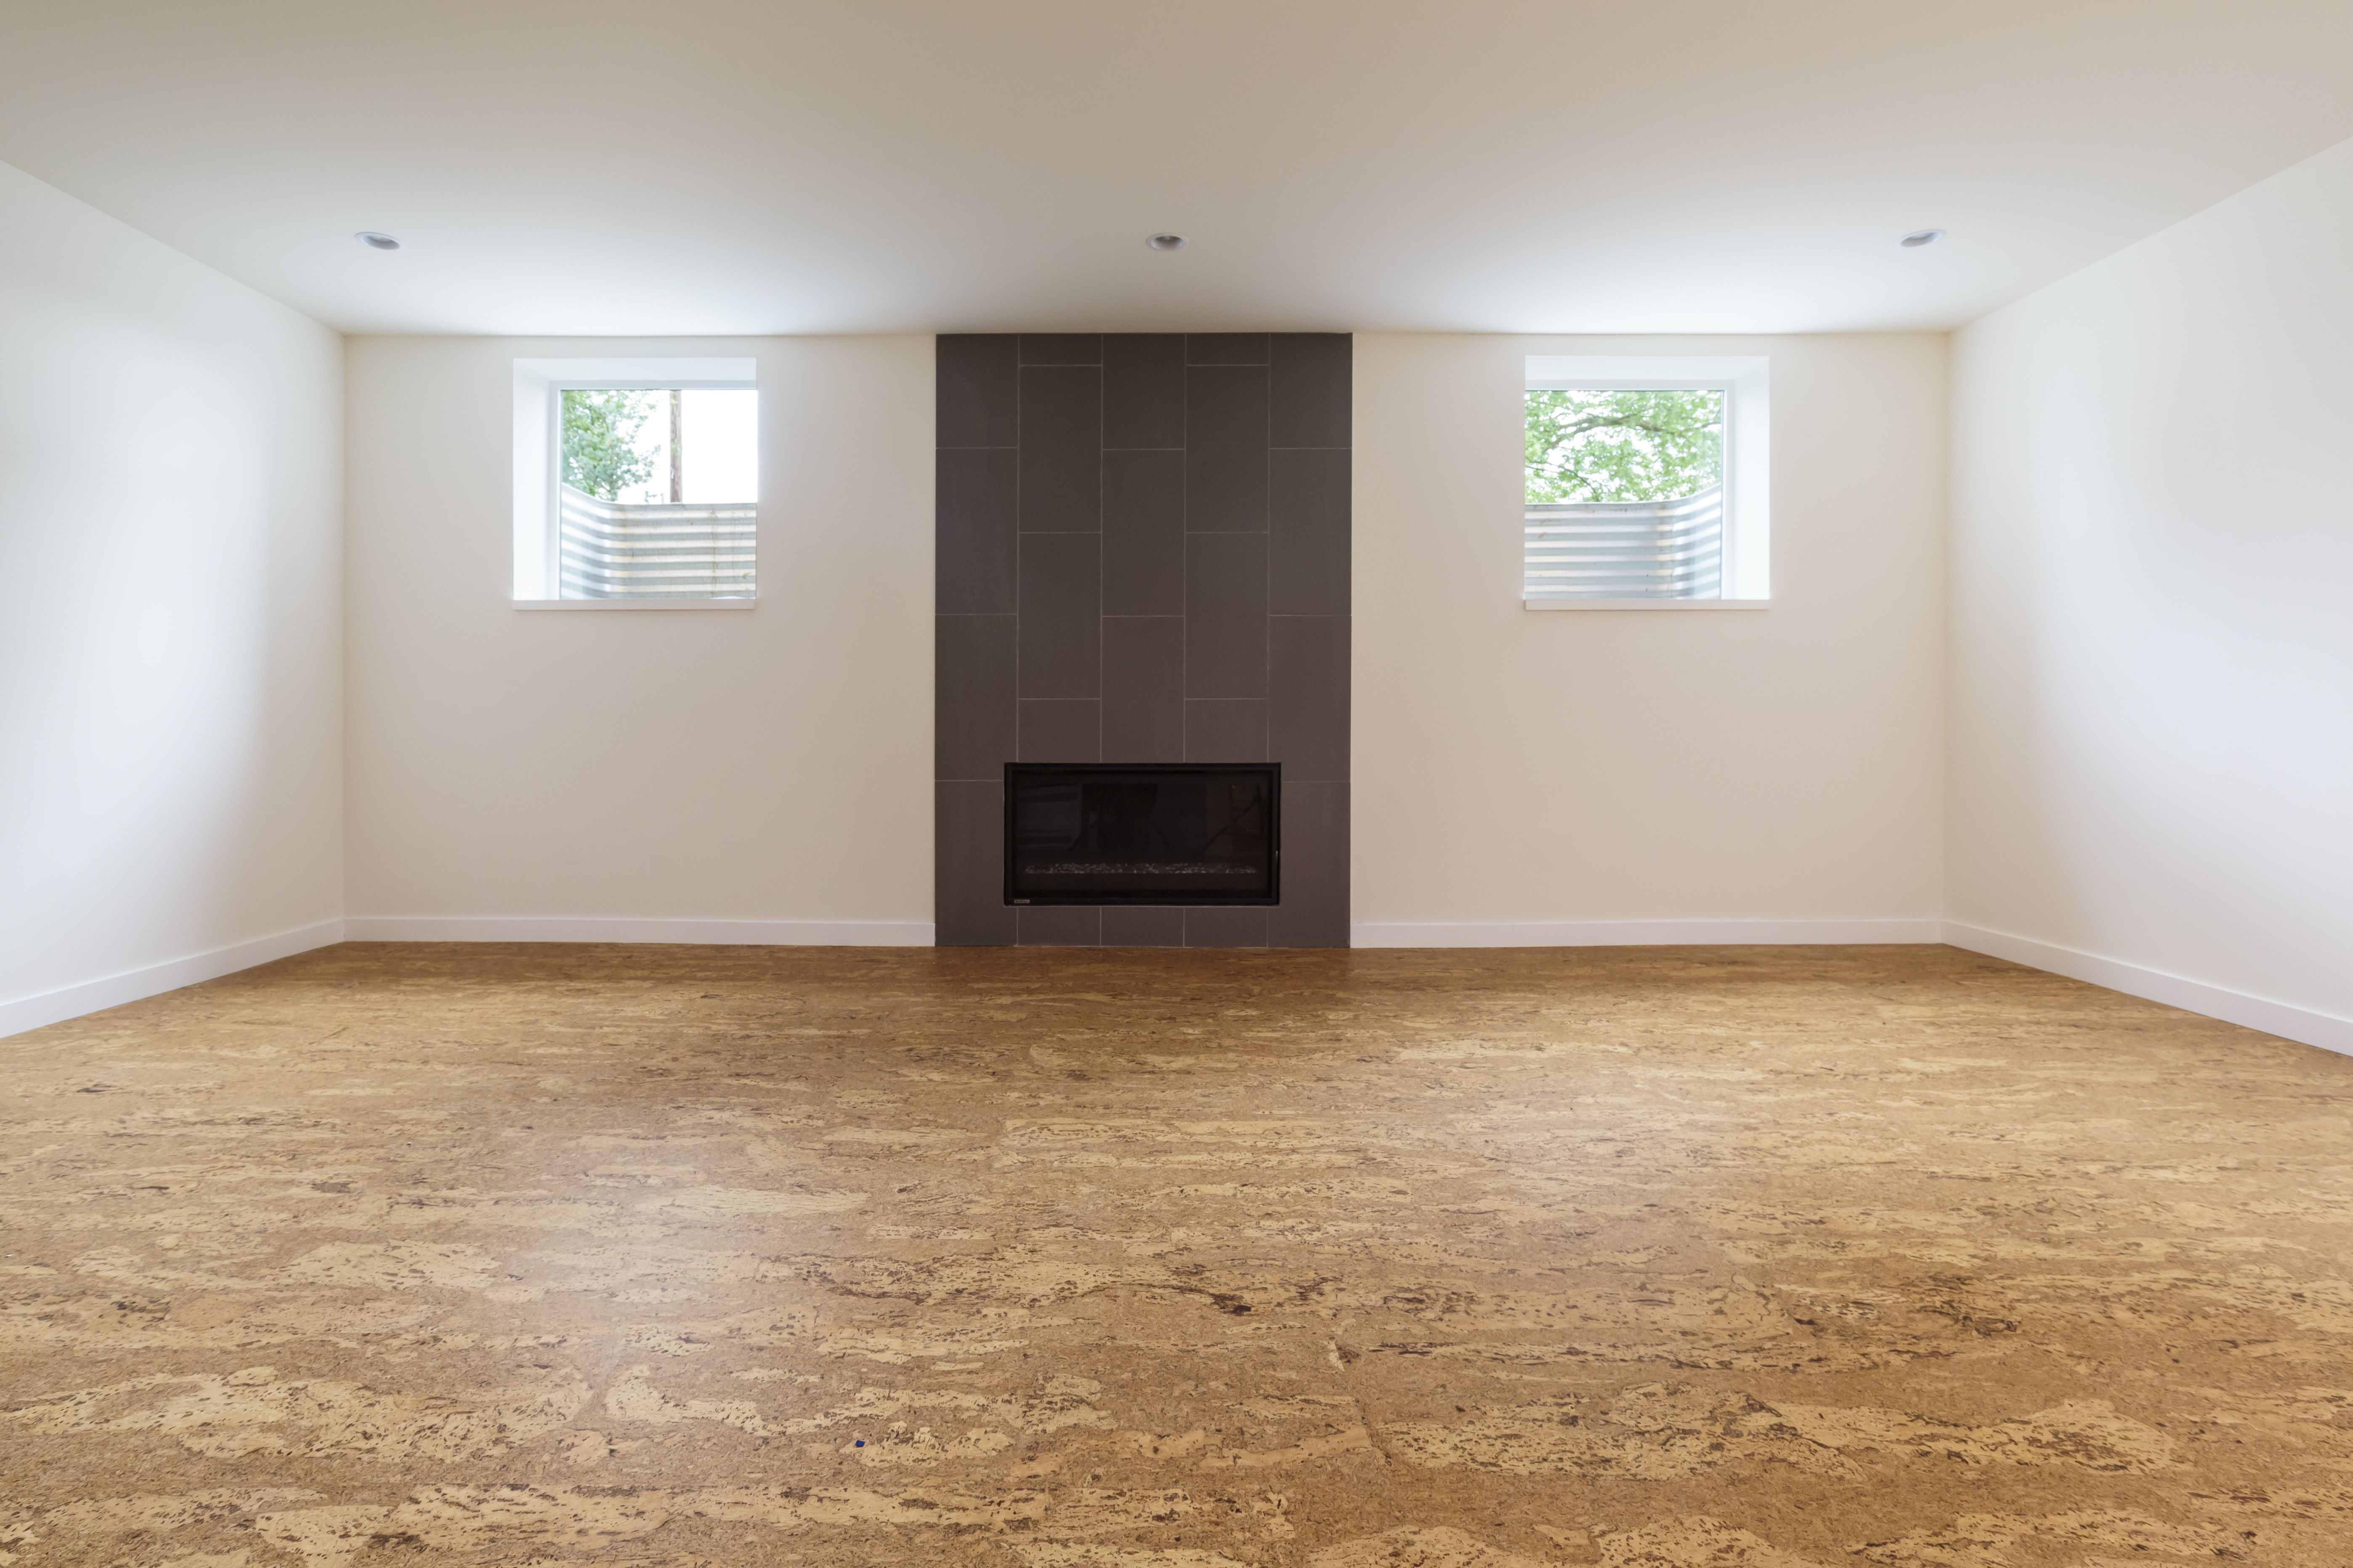 19 Cute How to Install Hardwood Floors On Cement Slab 2024 free download how to install hardwood floors on cement slab of cork flooring pros cons and cost regarding cork flooring in unfurnished new home 647206431 57e7c0c95f9b586c3504ca07